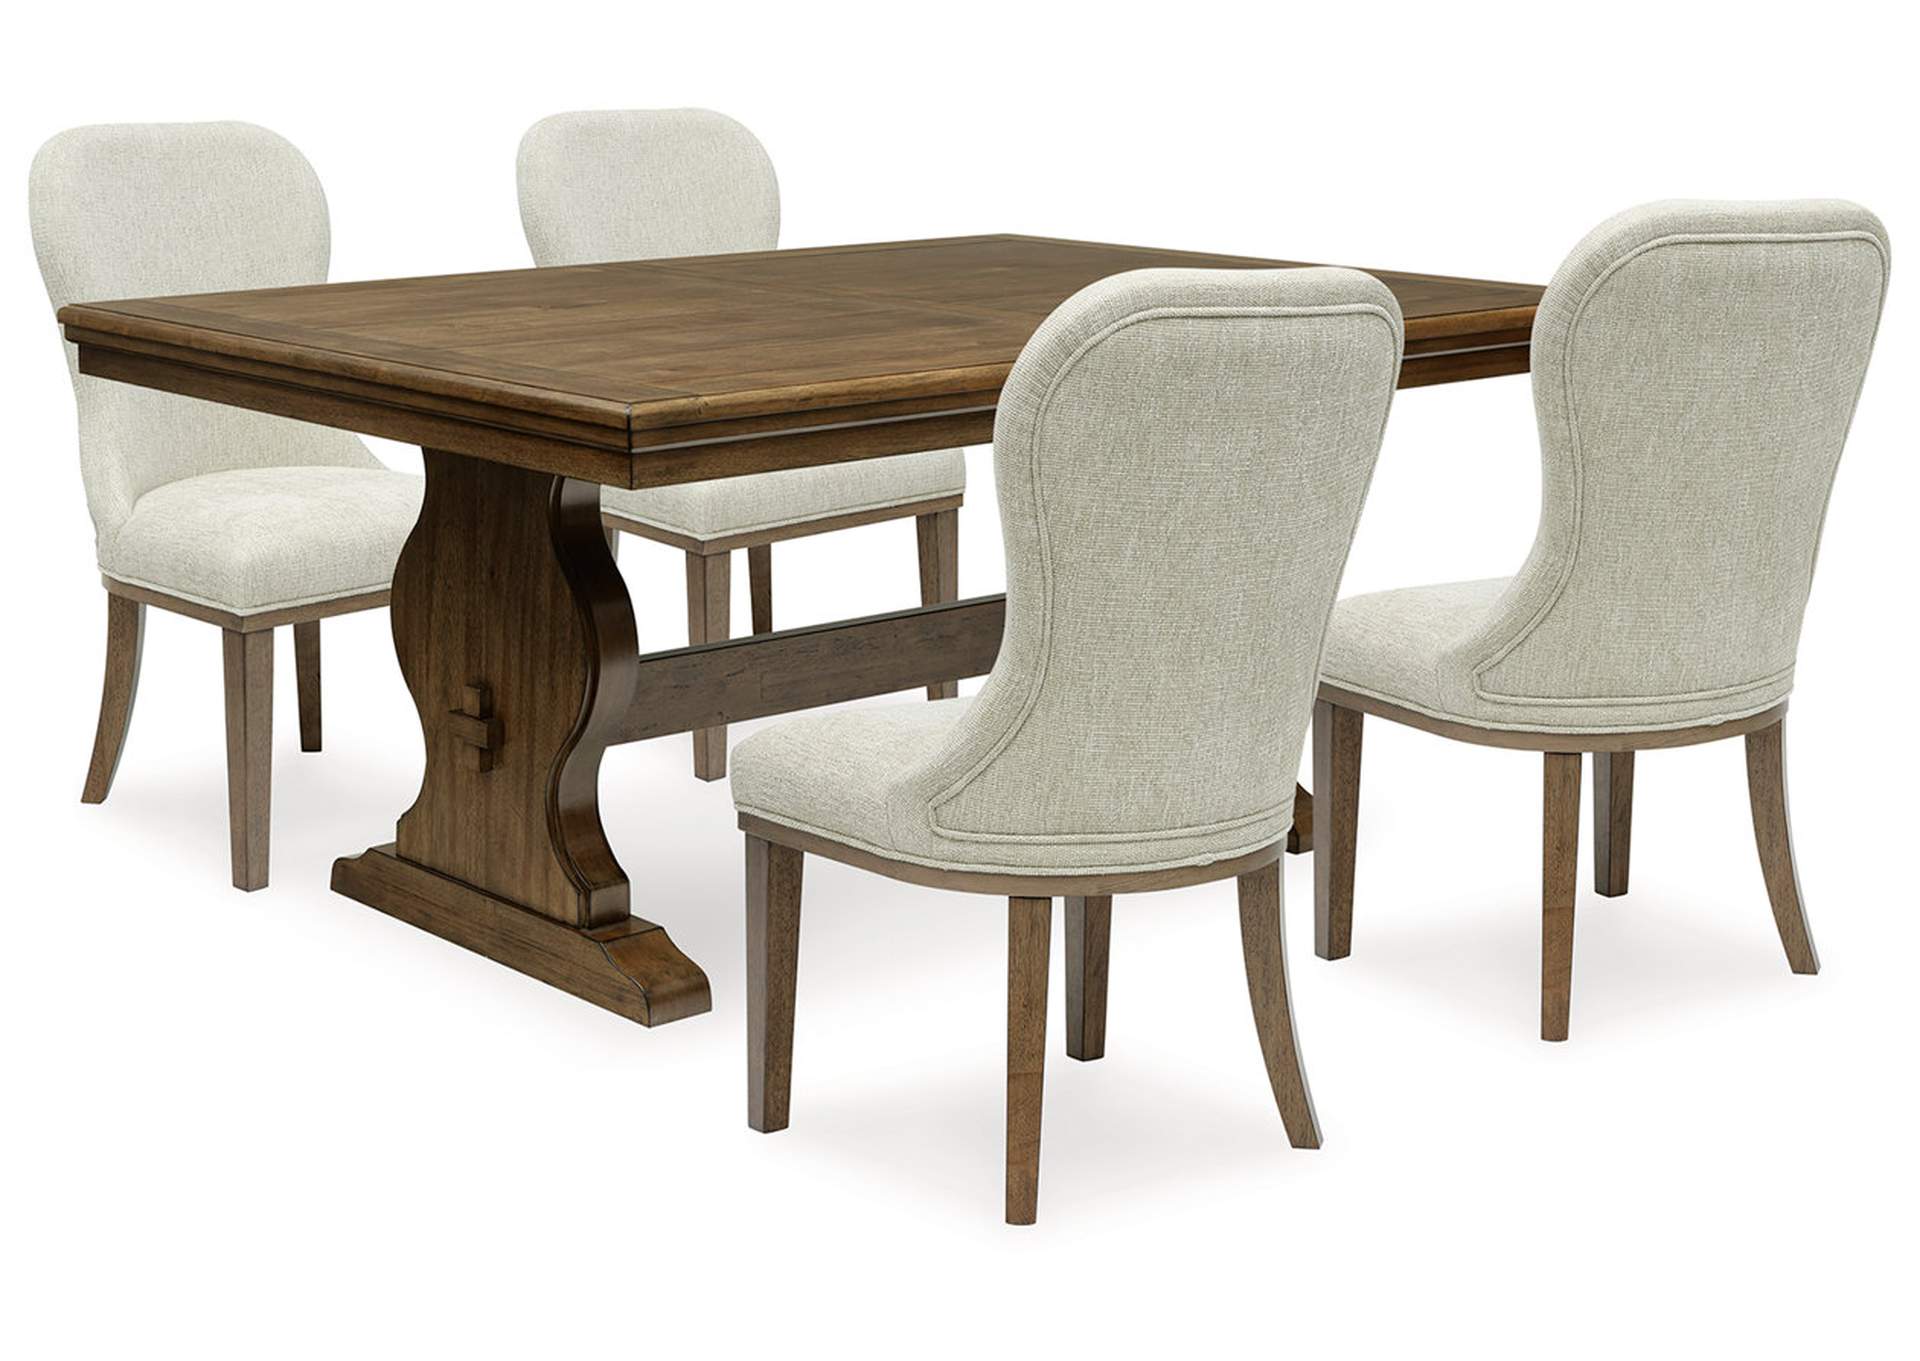 Sturlayne Dining Table and 4 Chairs with Storage,Benchcraft